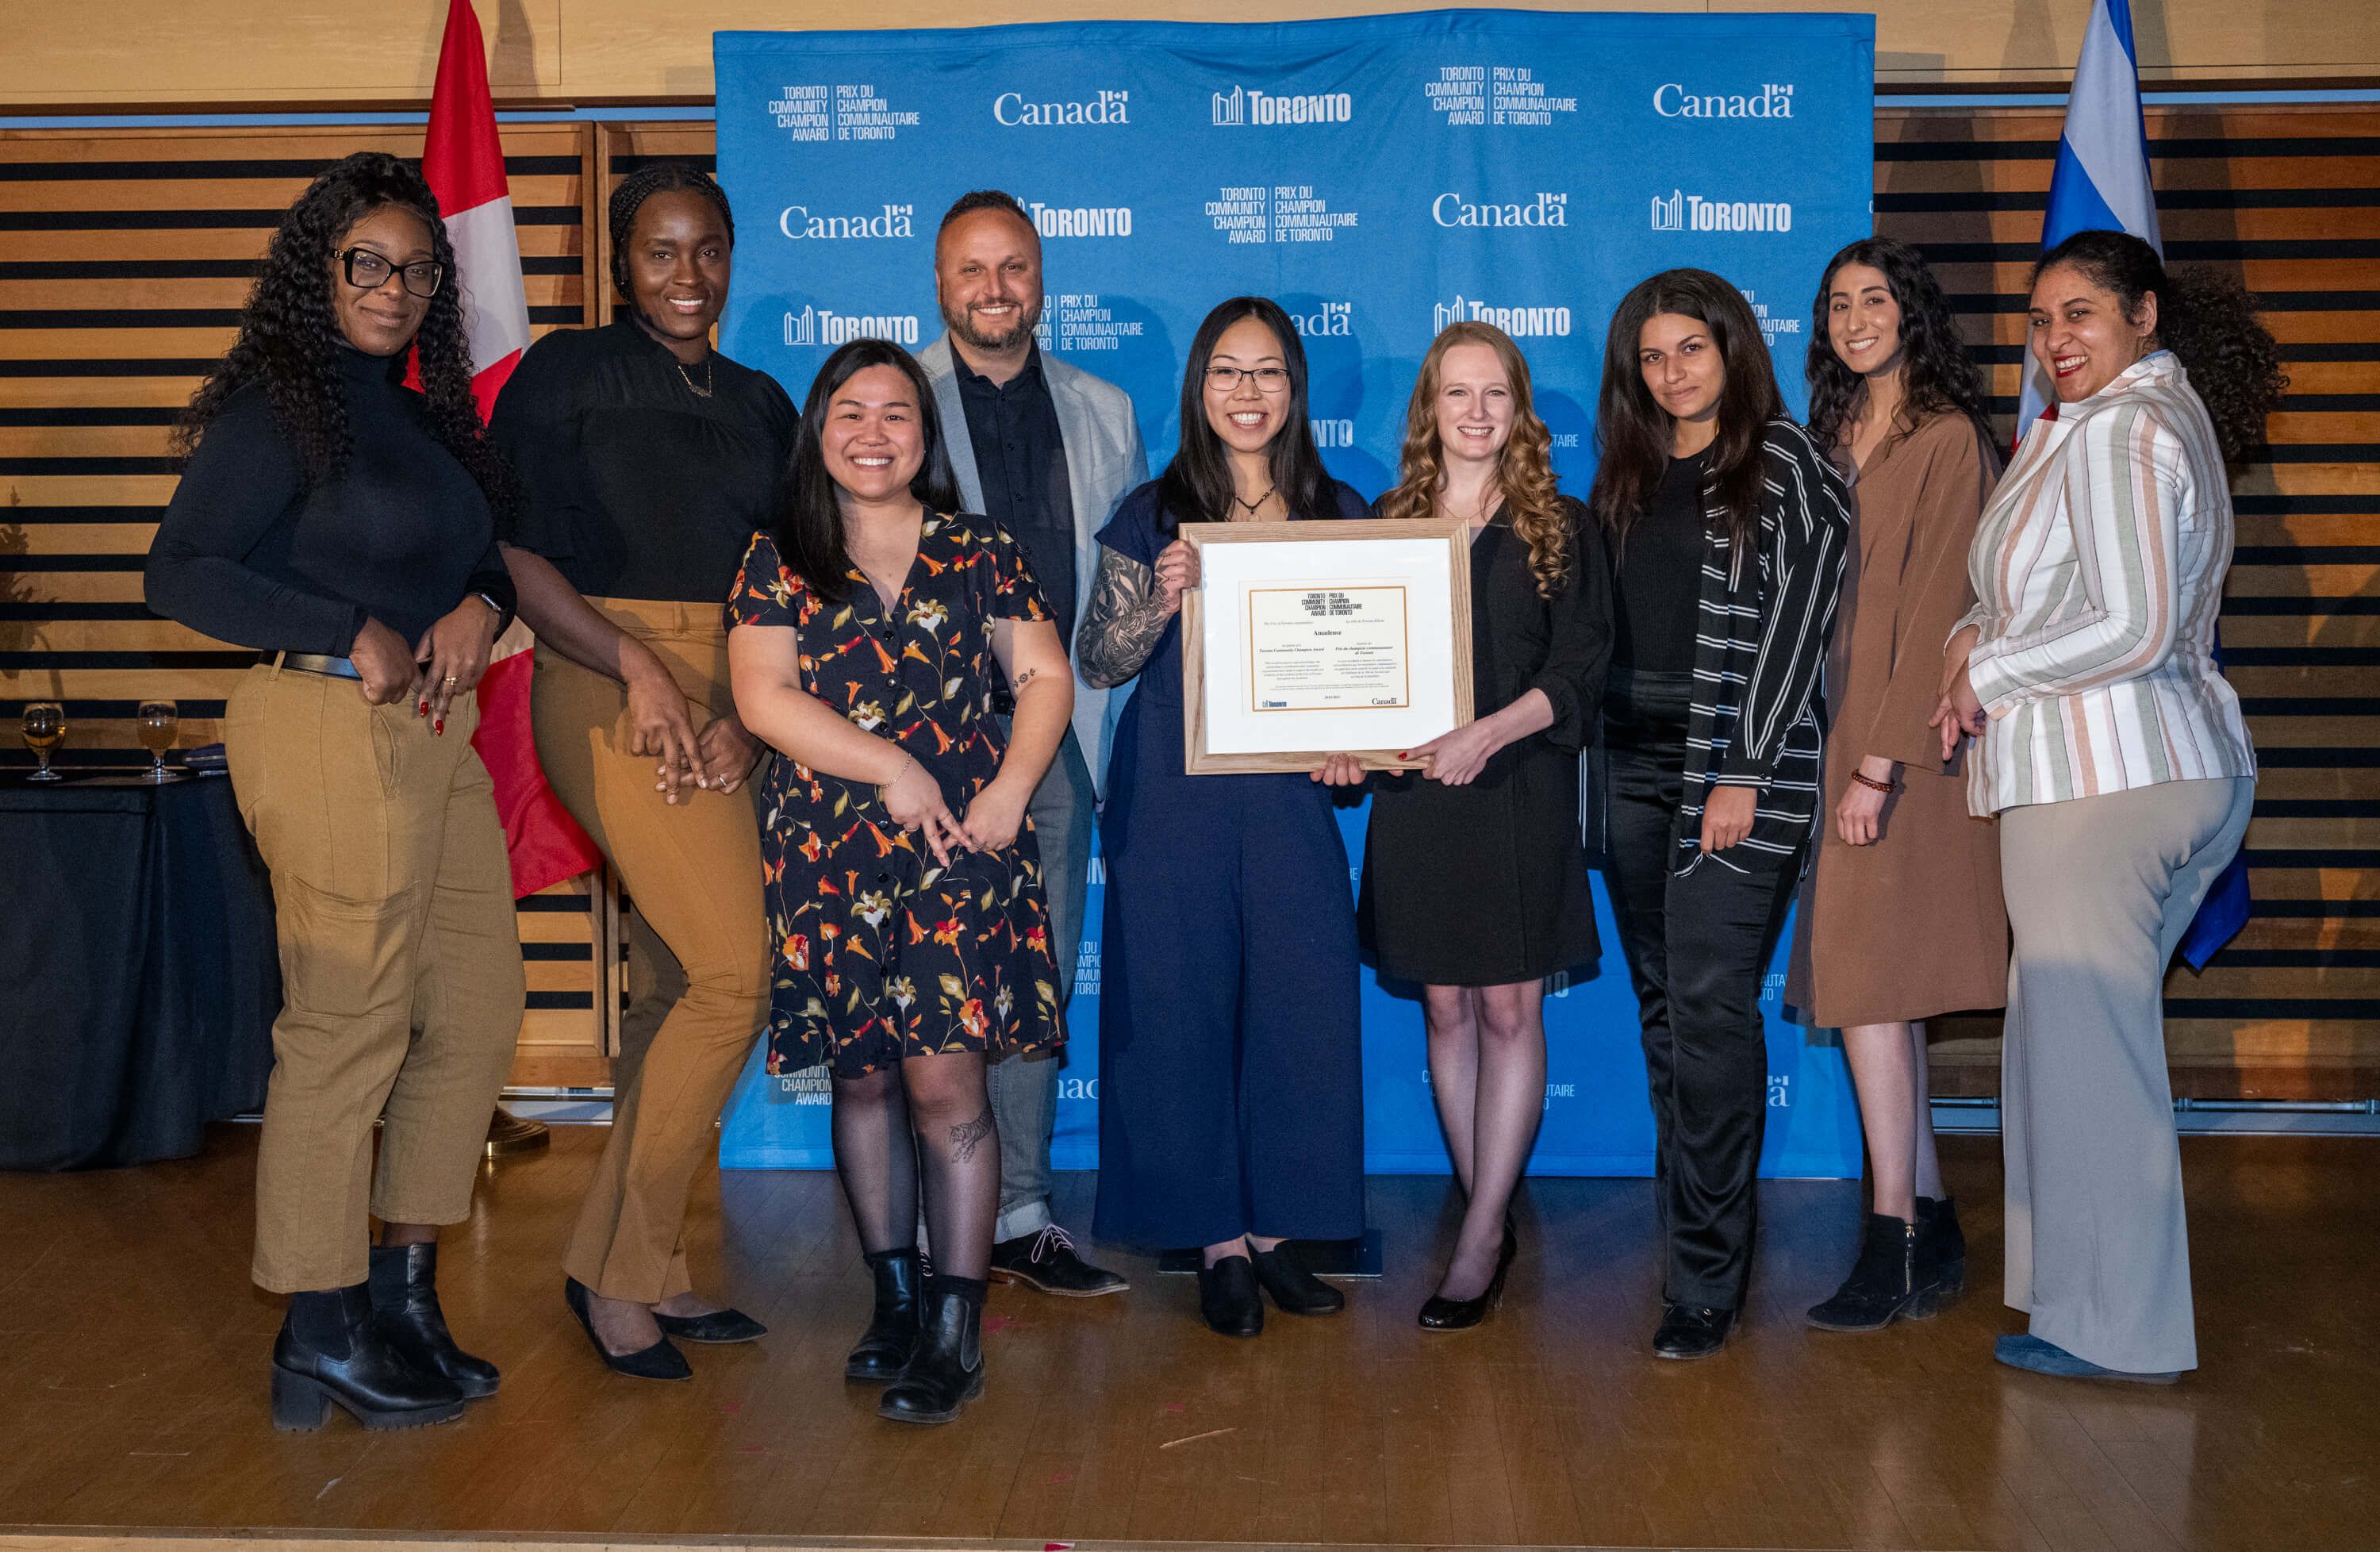 The Amadeusz staff celebrating their achievements at the Toronto Community Champion Award ceremony at the Bram & Bluma Appel Salon in the Toronto Reference Library